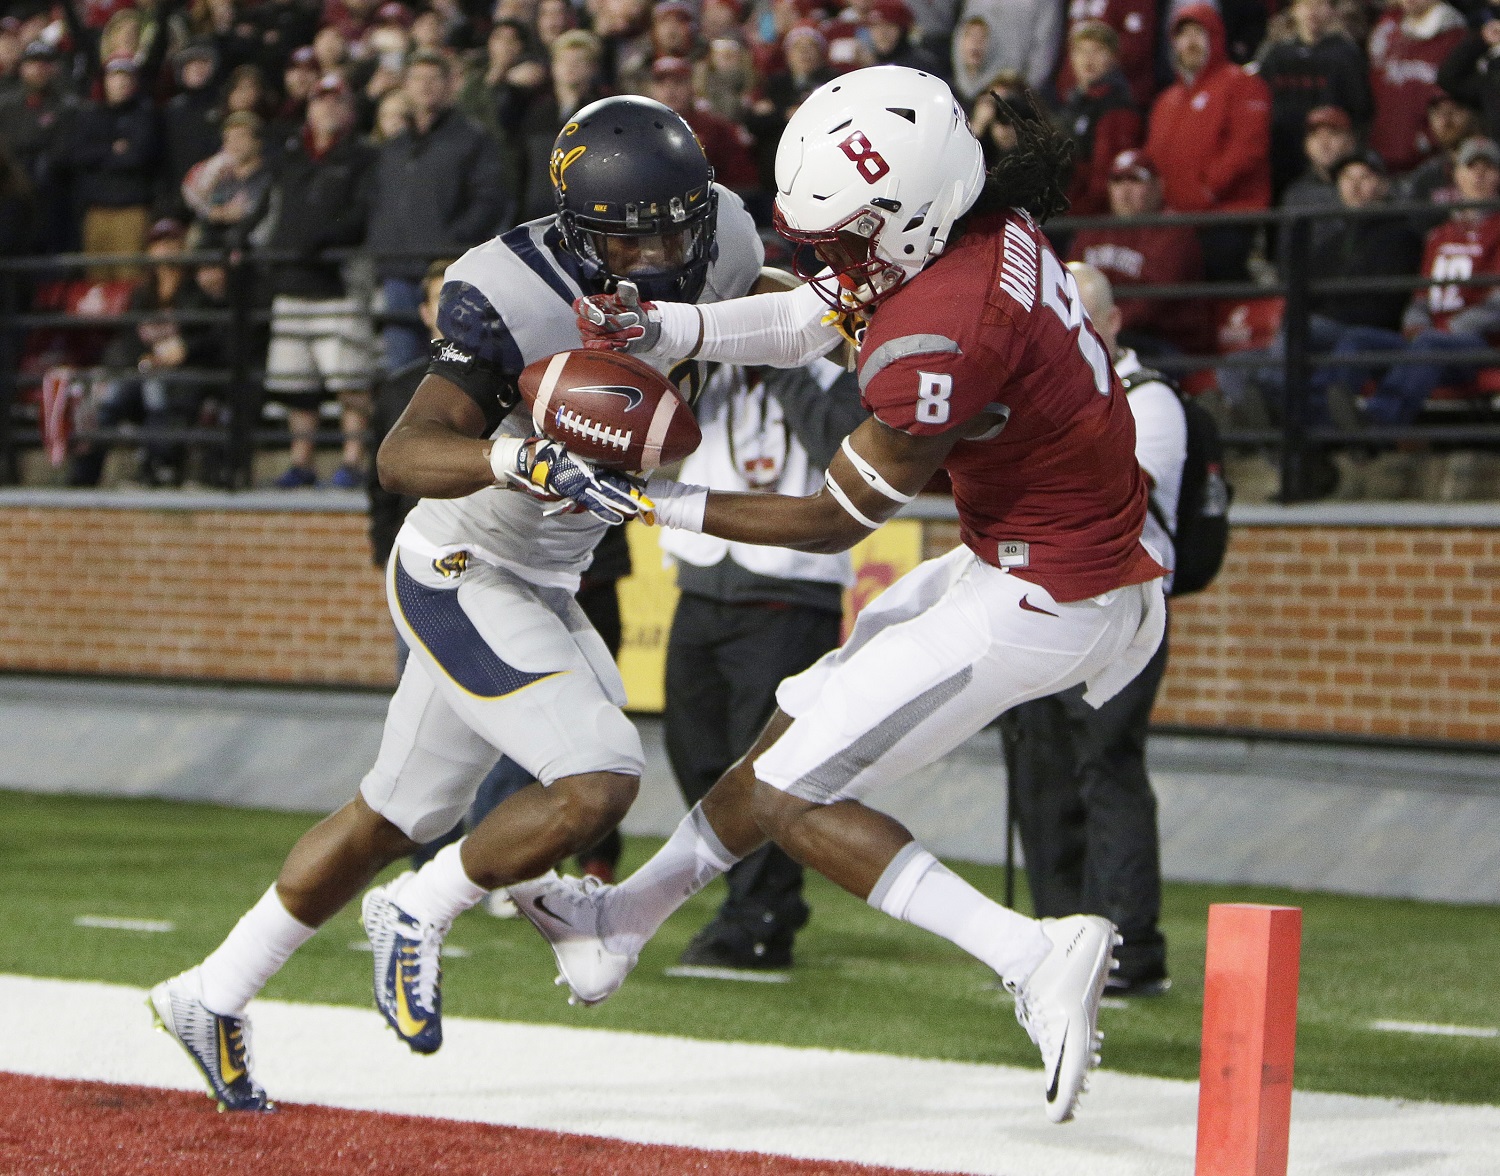 California cornerback Josh Drayden, left, breaks up a pass intended for Washington State wide receiver Tavares Martin Jr. (8) during the first half of an NCAA college football game in Pullman, Wash., Saturday, Nov. 12, 2016. (AP Photo/Young Kwak)